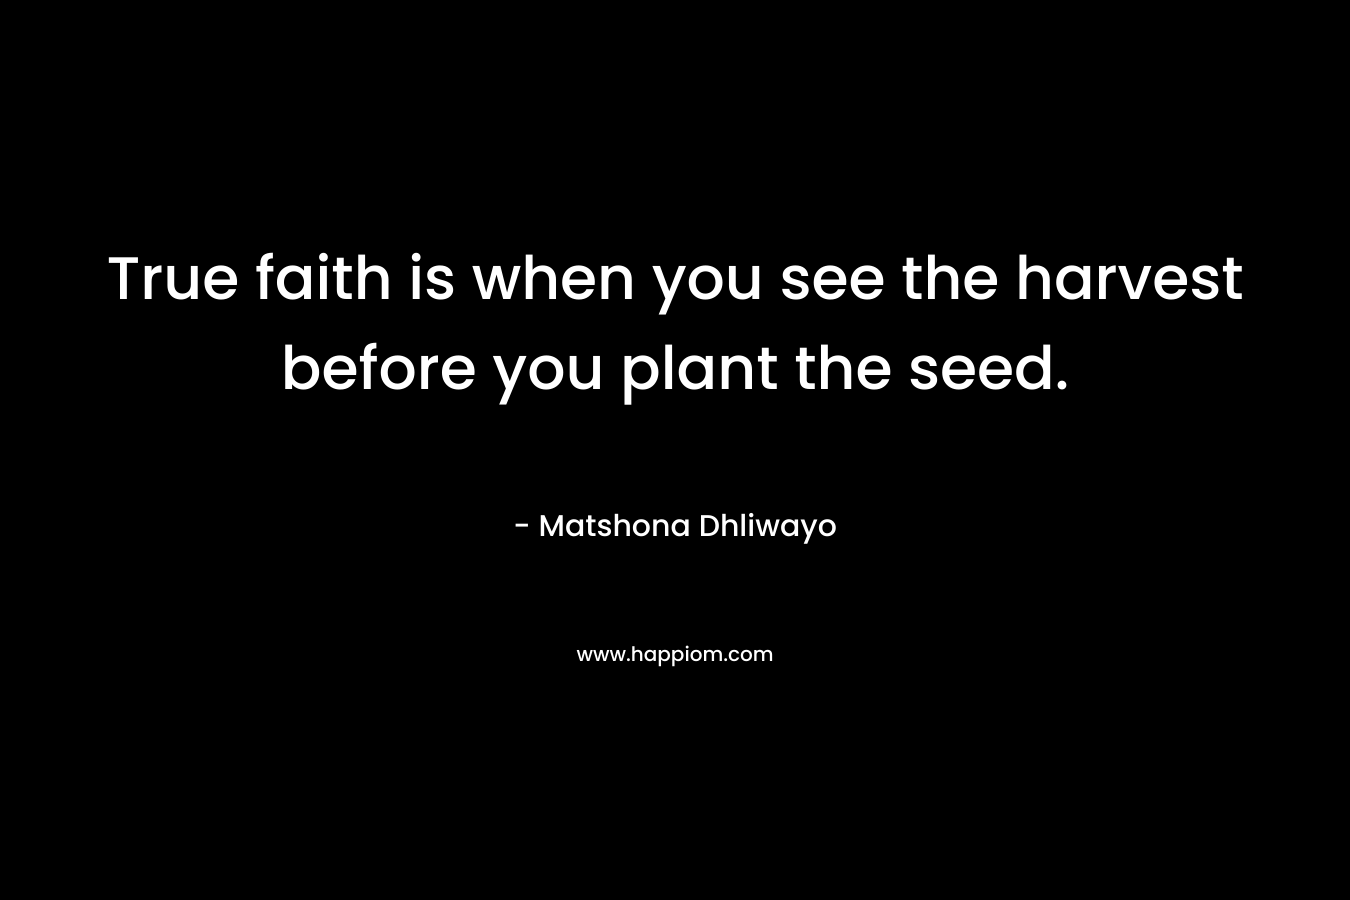 True faith is when you see the harvest before you plant the seed.